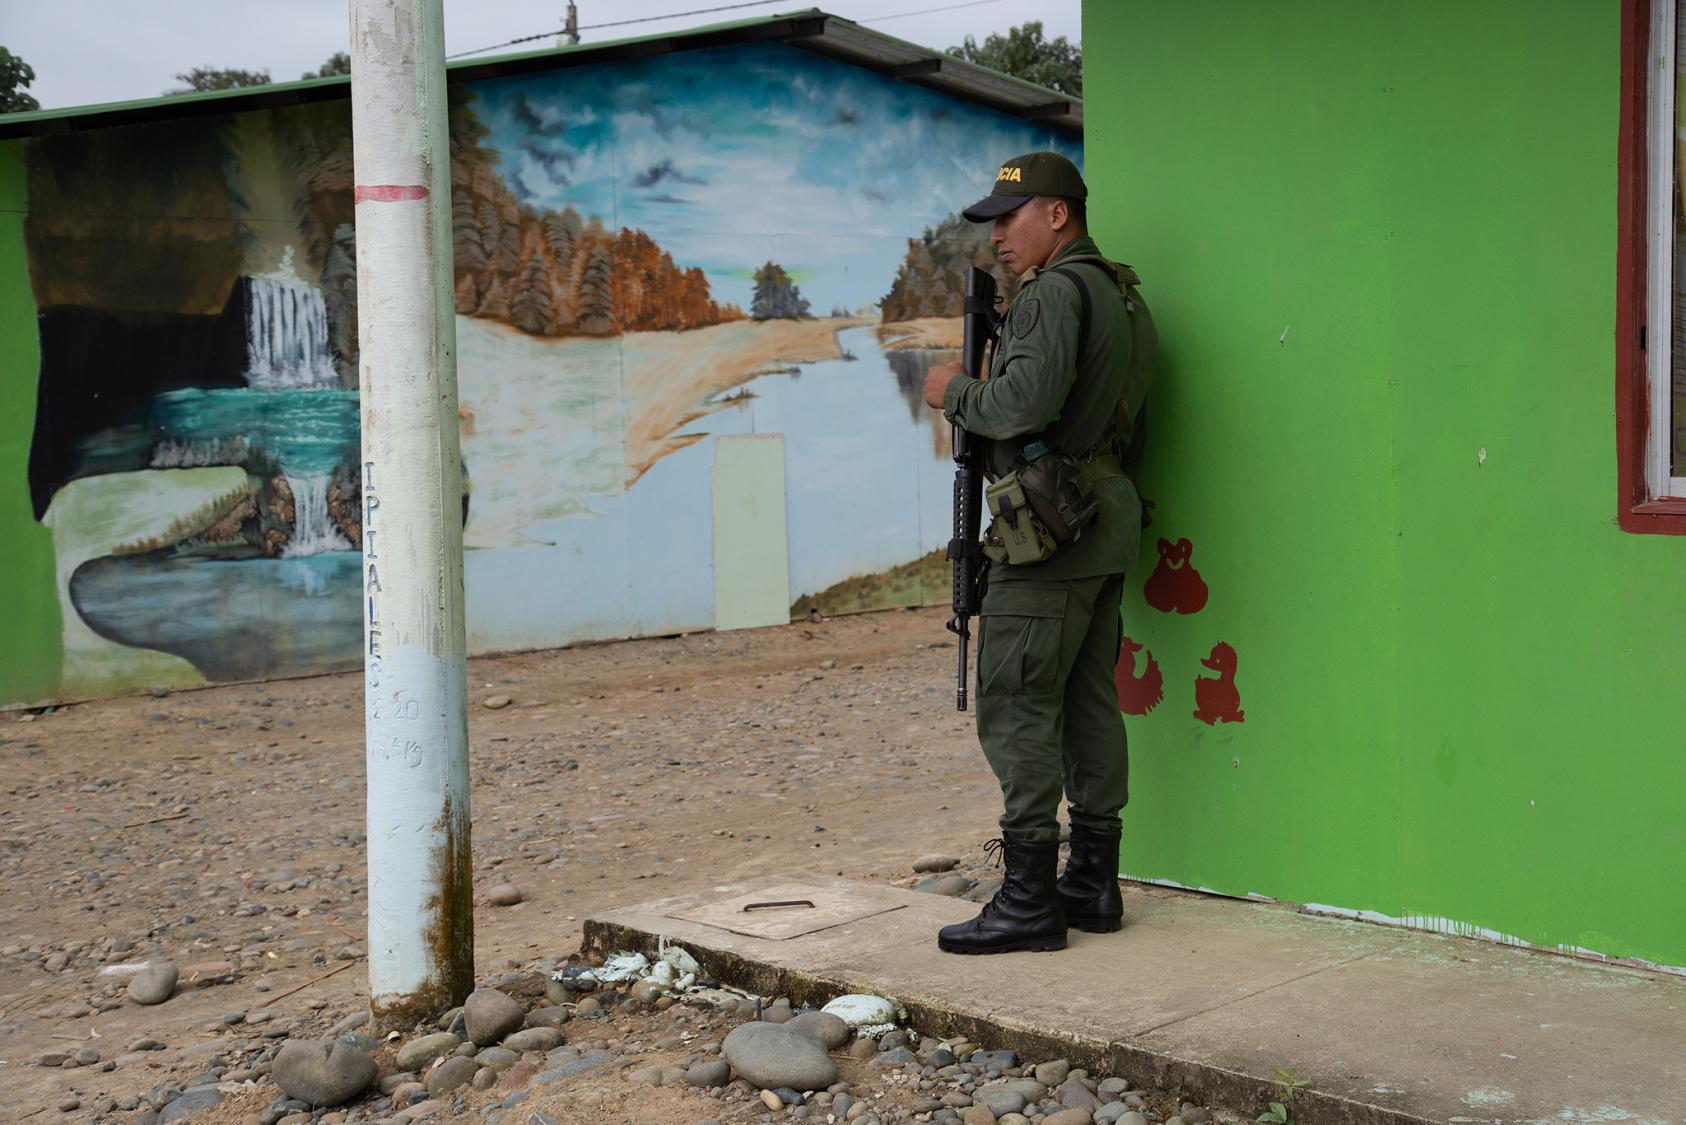 A police officer stands guard at the socio-economic reintegration zone in La Variante for former FARC members and their families. Tumaco, Nariño, Colombia. September 19, 2019 (Photo: USIP)